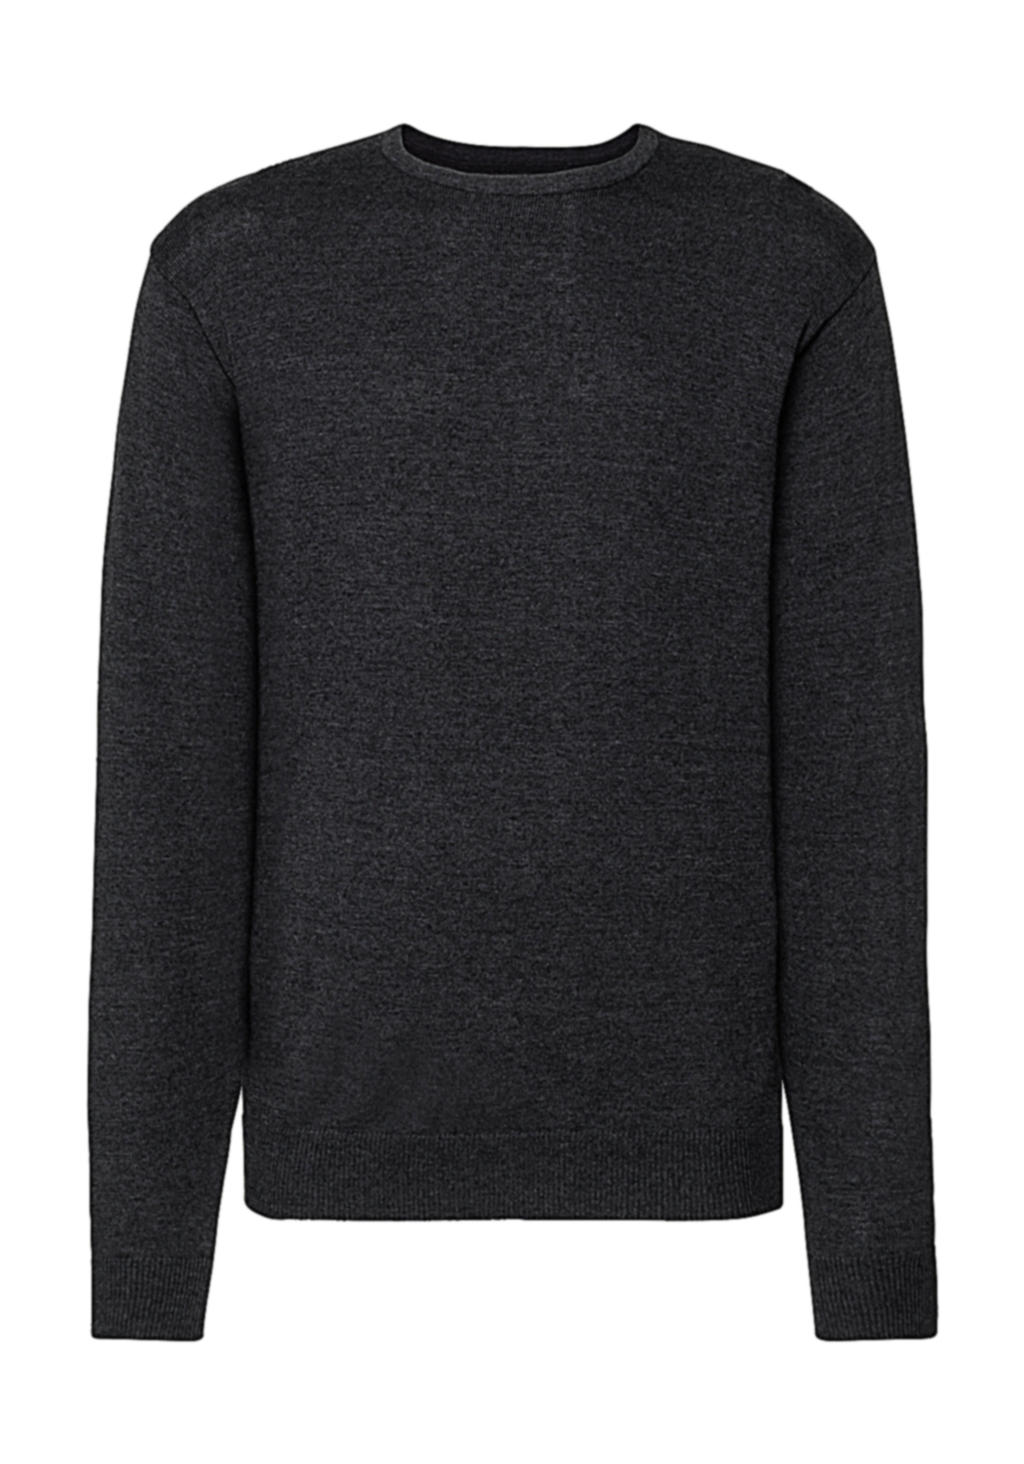  Mens Crew Neck Knitted Pullover in Farbe Charcoal Marl